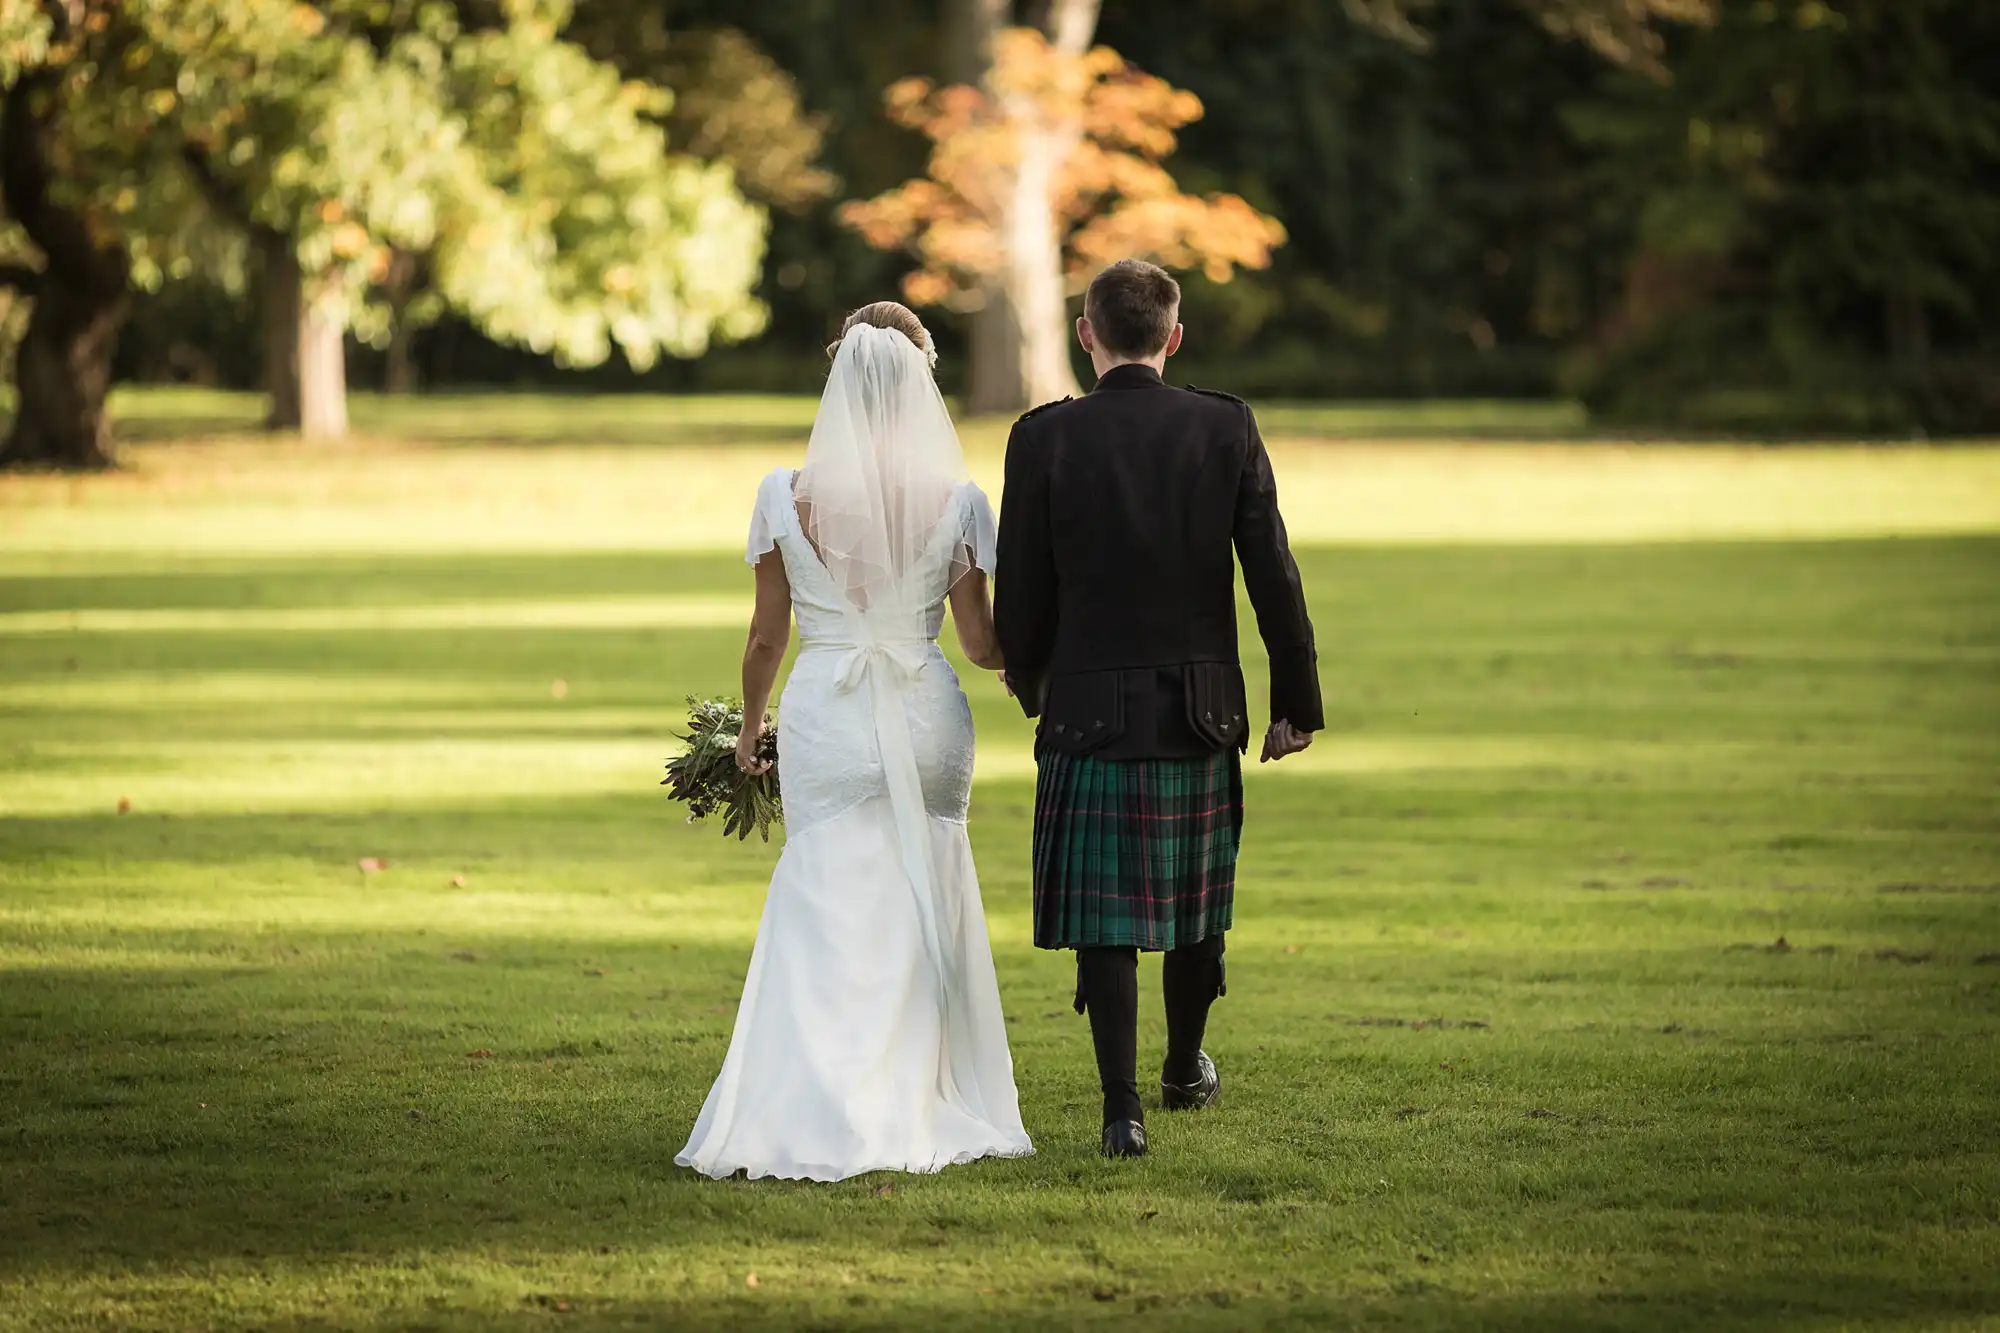 A bride in a white gown and a groom in a kilt and jacket walk hand in hand across a sunlit, grassy park.